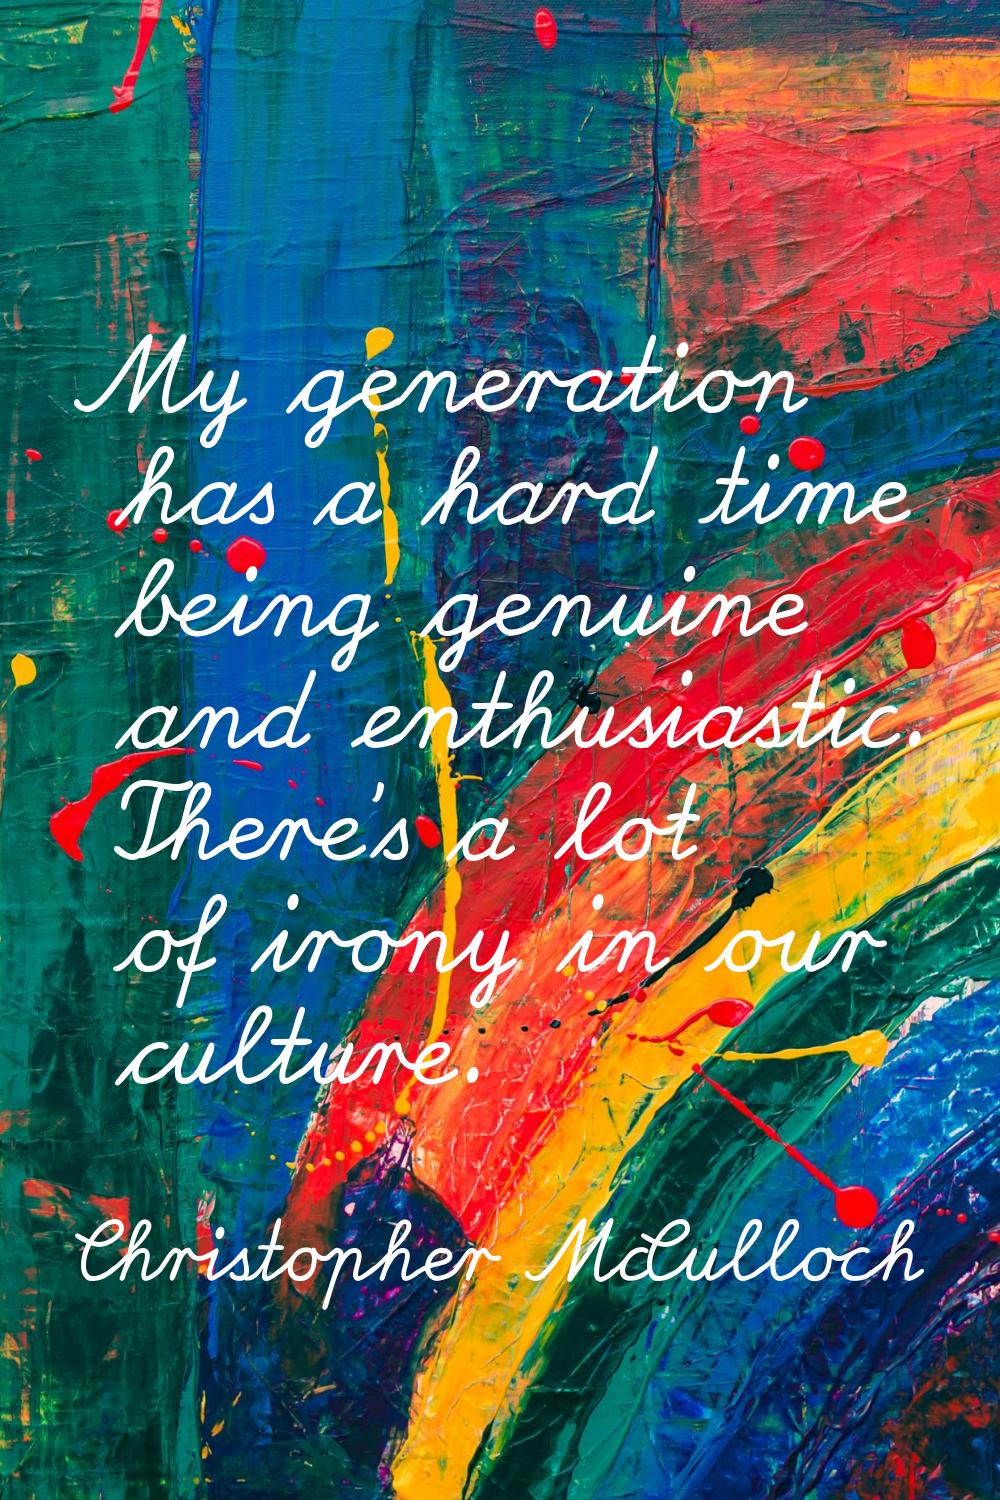 My generation has a hard time being genuine and enthusiastic. There's a lot of irony in our culture